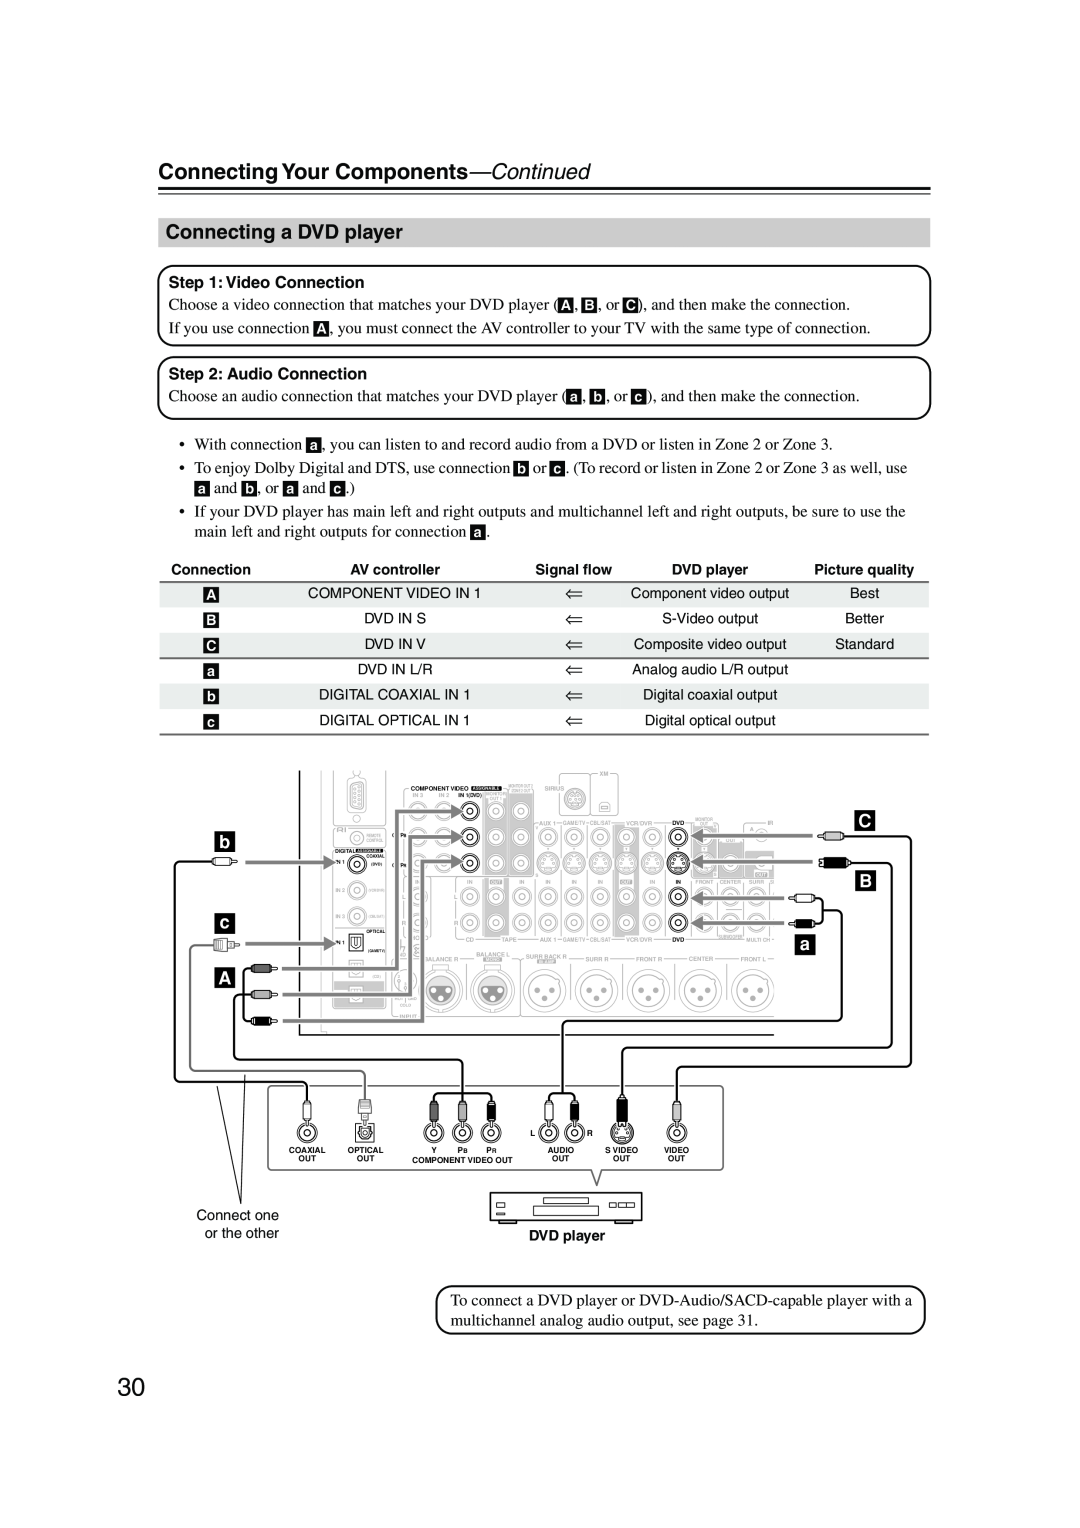 Onkyo PR-SC885 instruction manual Connecting a DVD player, Connecting Your Components—Continued, b c A 